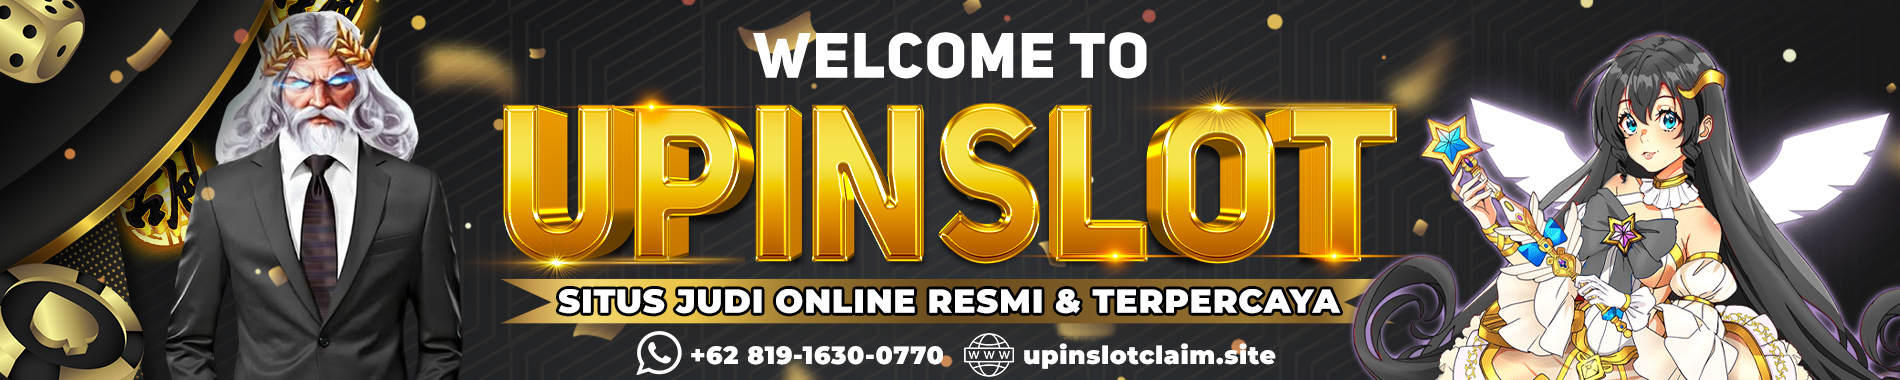 Welcome to upinslot